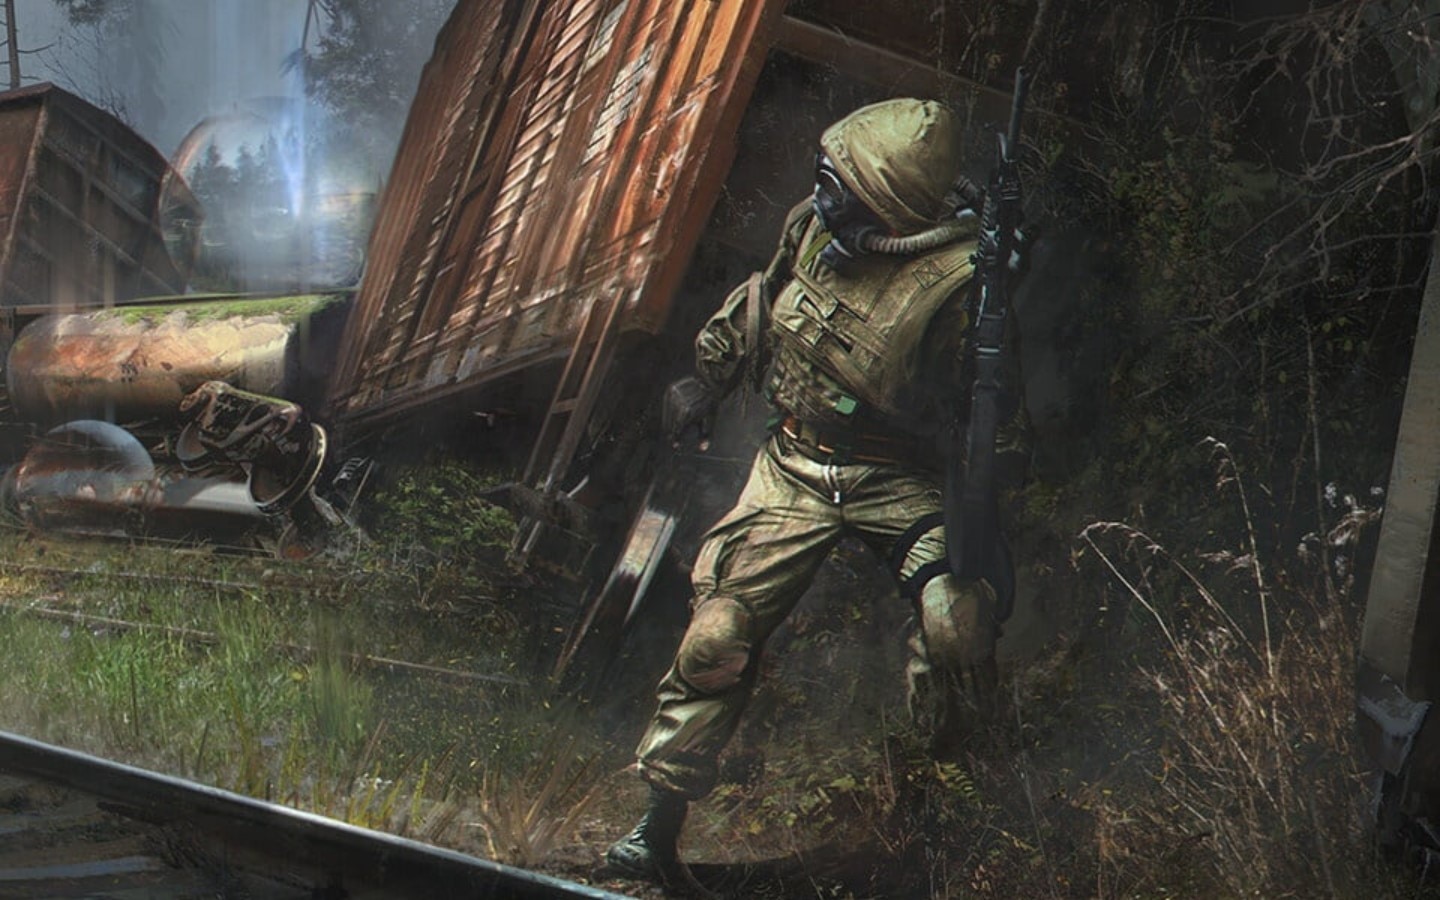 Call of Duty: Nifty Trick Lets You Get Ghost 'Condemned' Operator